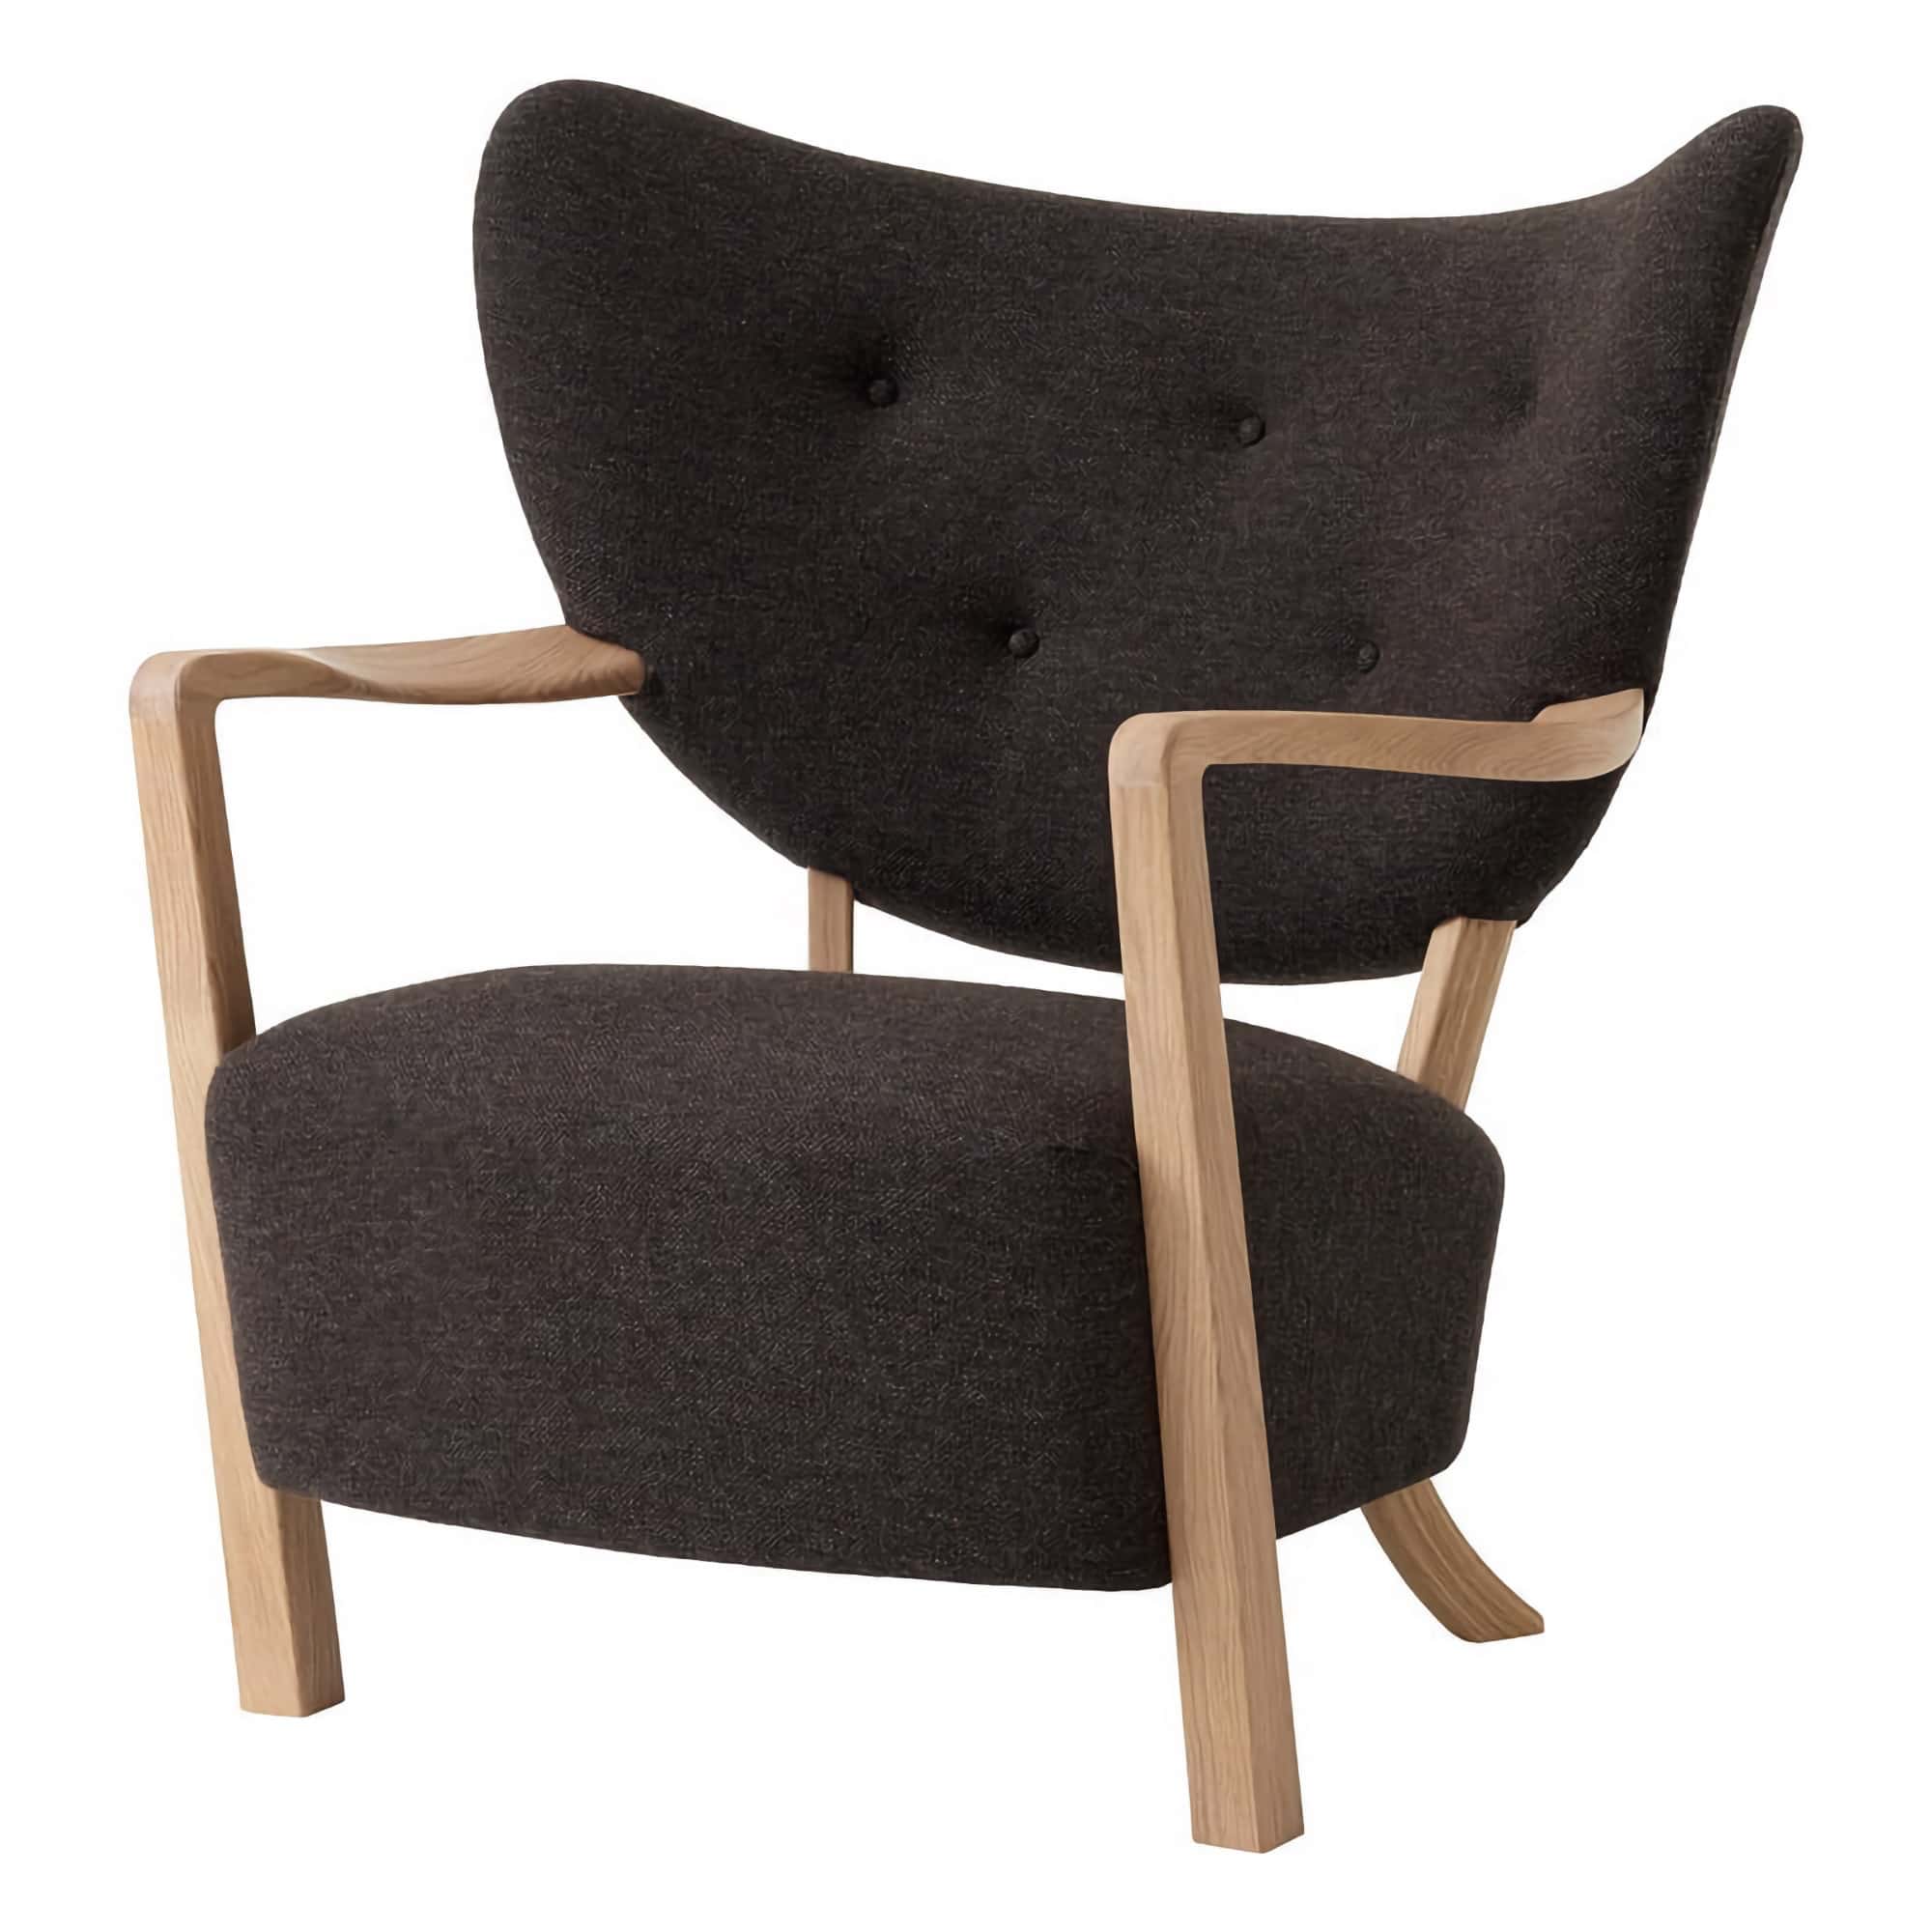 &Tradition Wulff ATD2 lounge chair